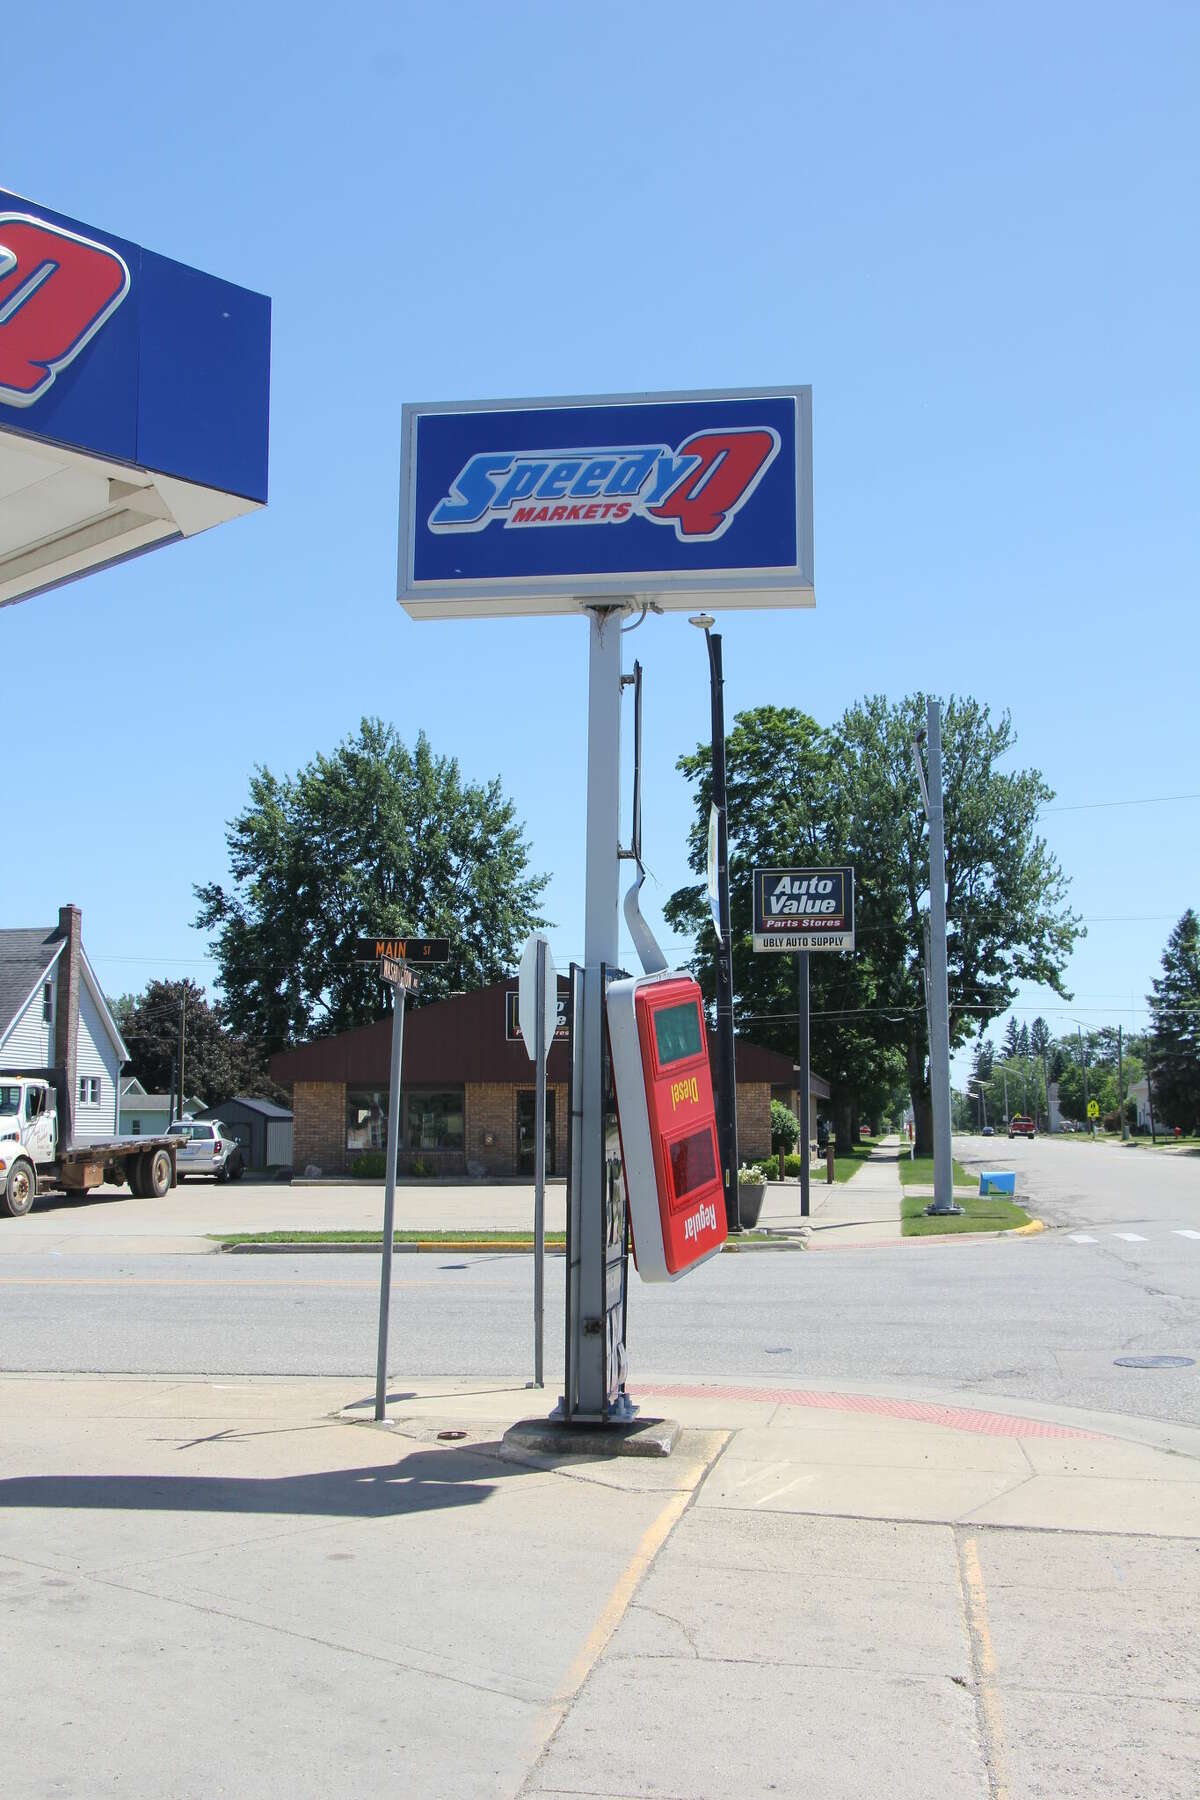 An unfortunate gas station sign was damaged by the strong winds.